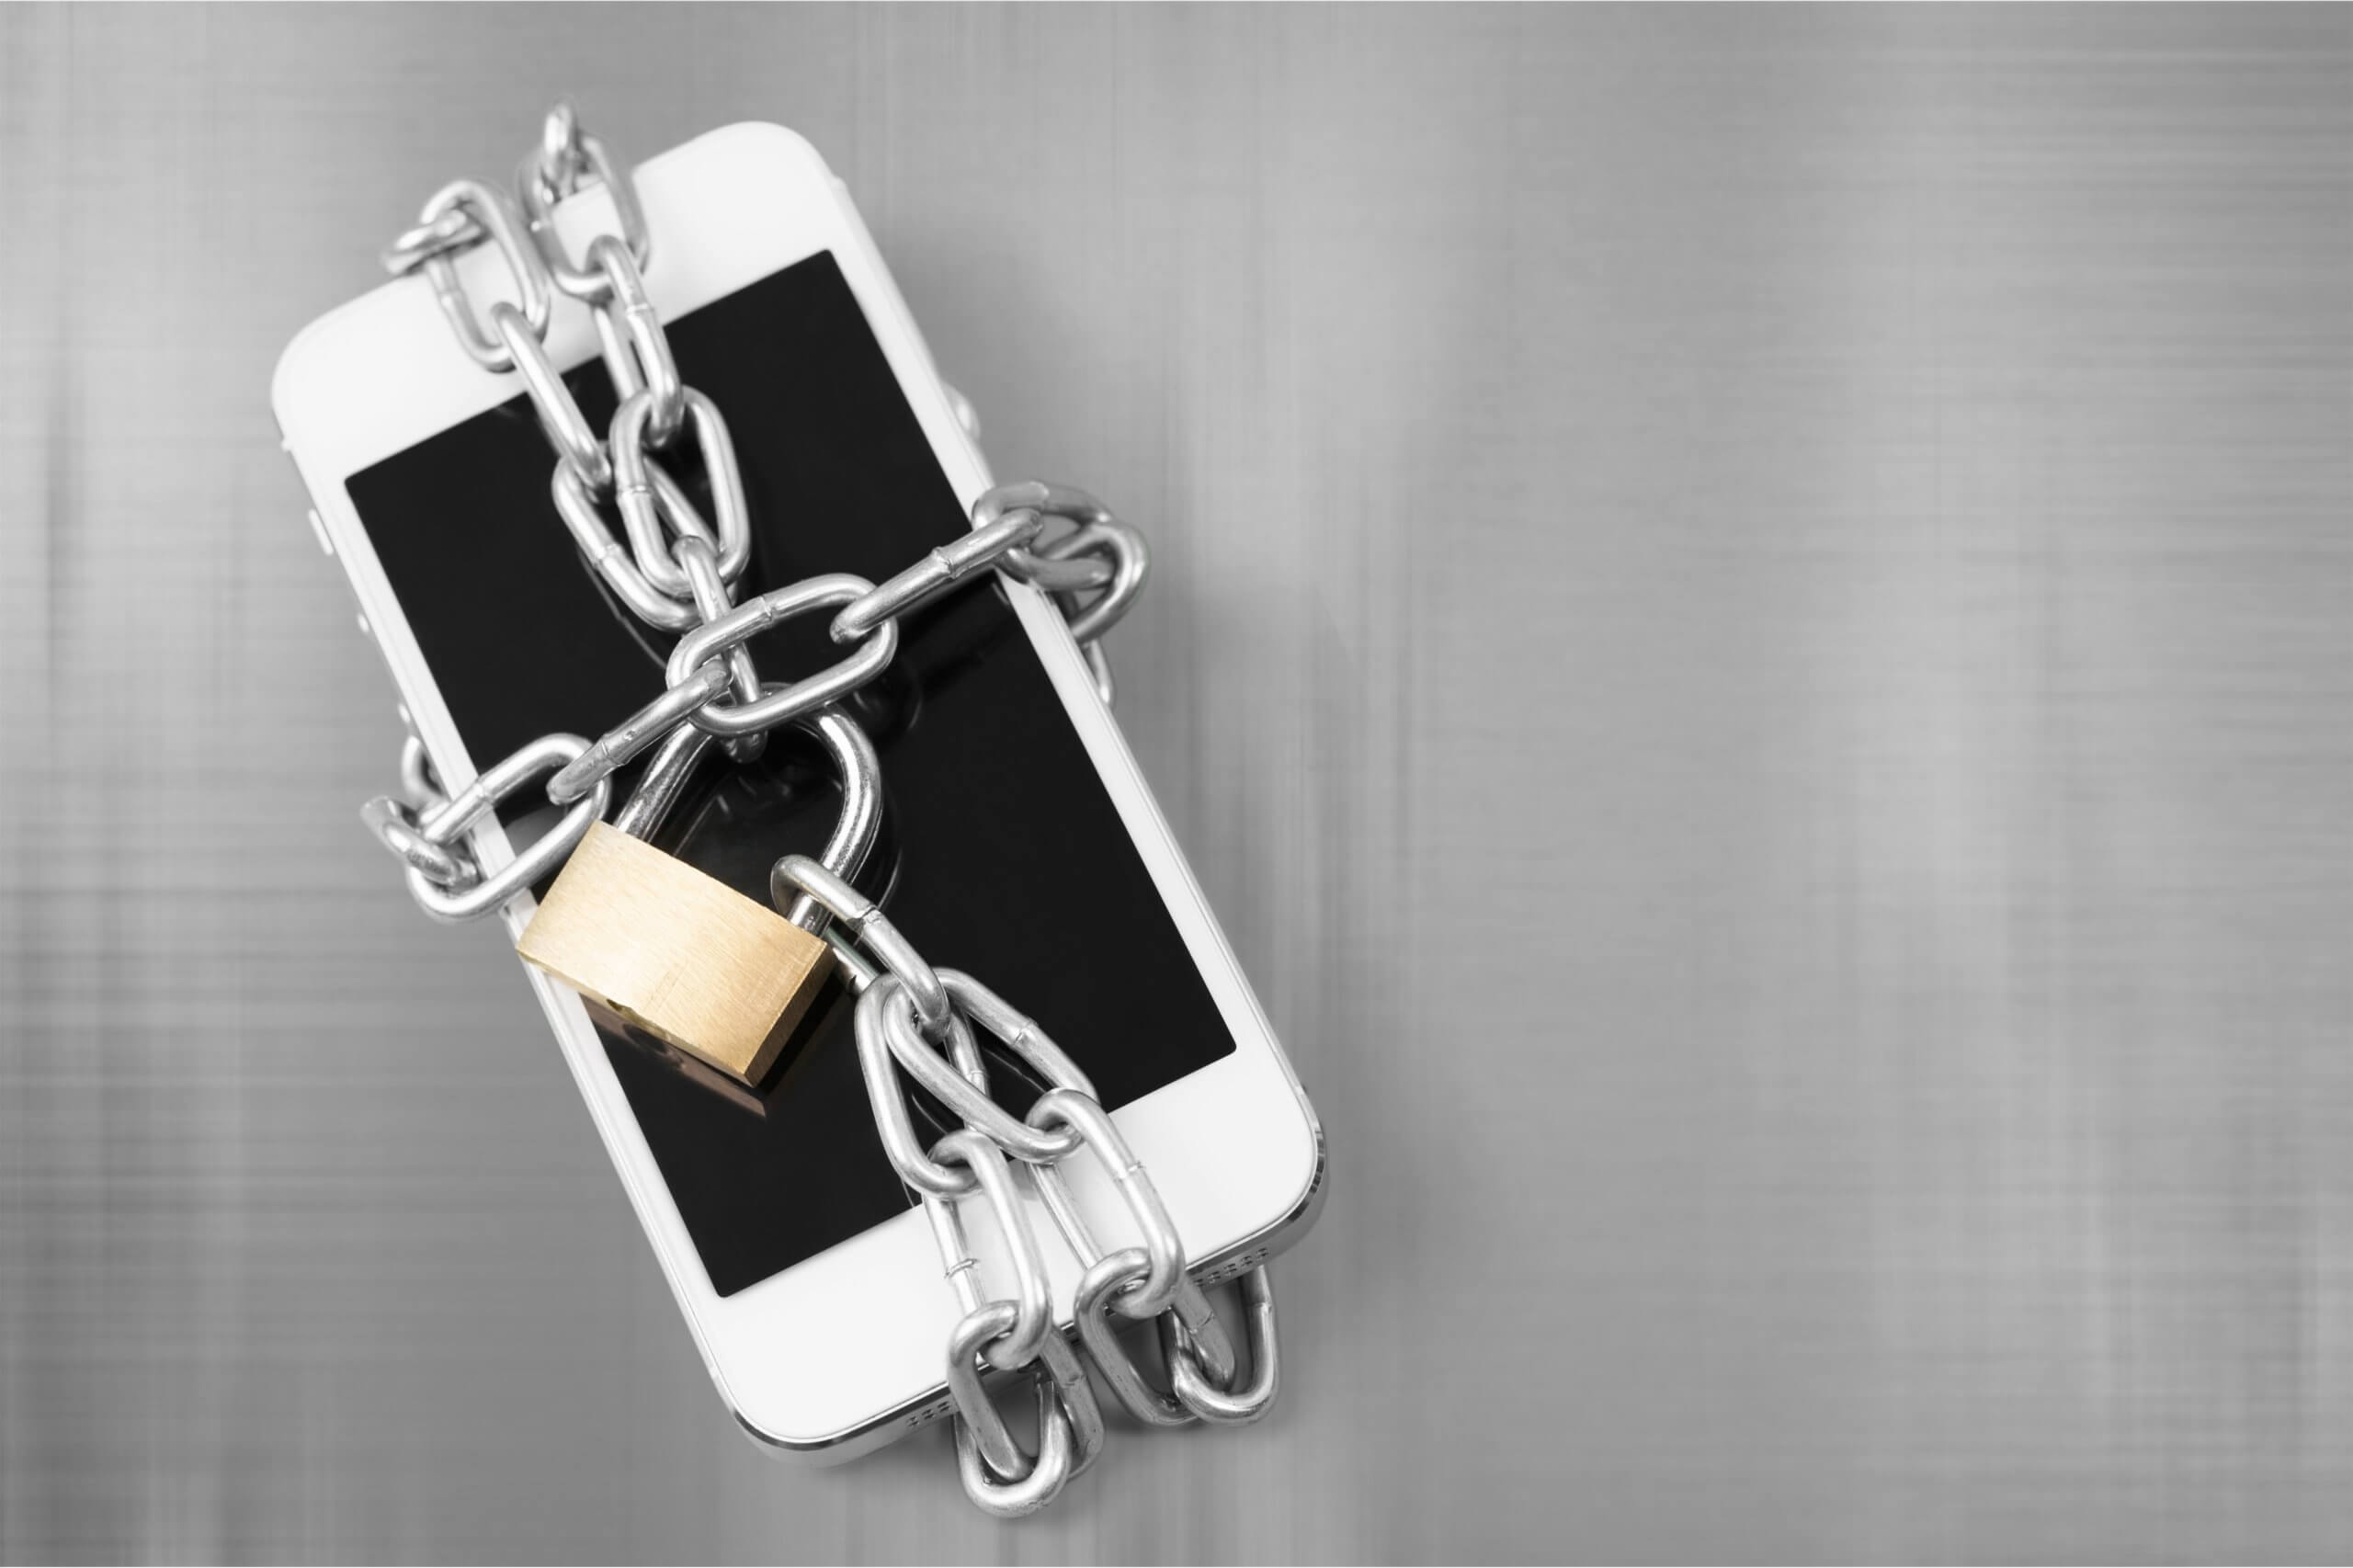 Can You Sell Locked iPhones? Yes, But Proceed With Caution